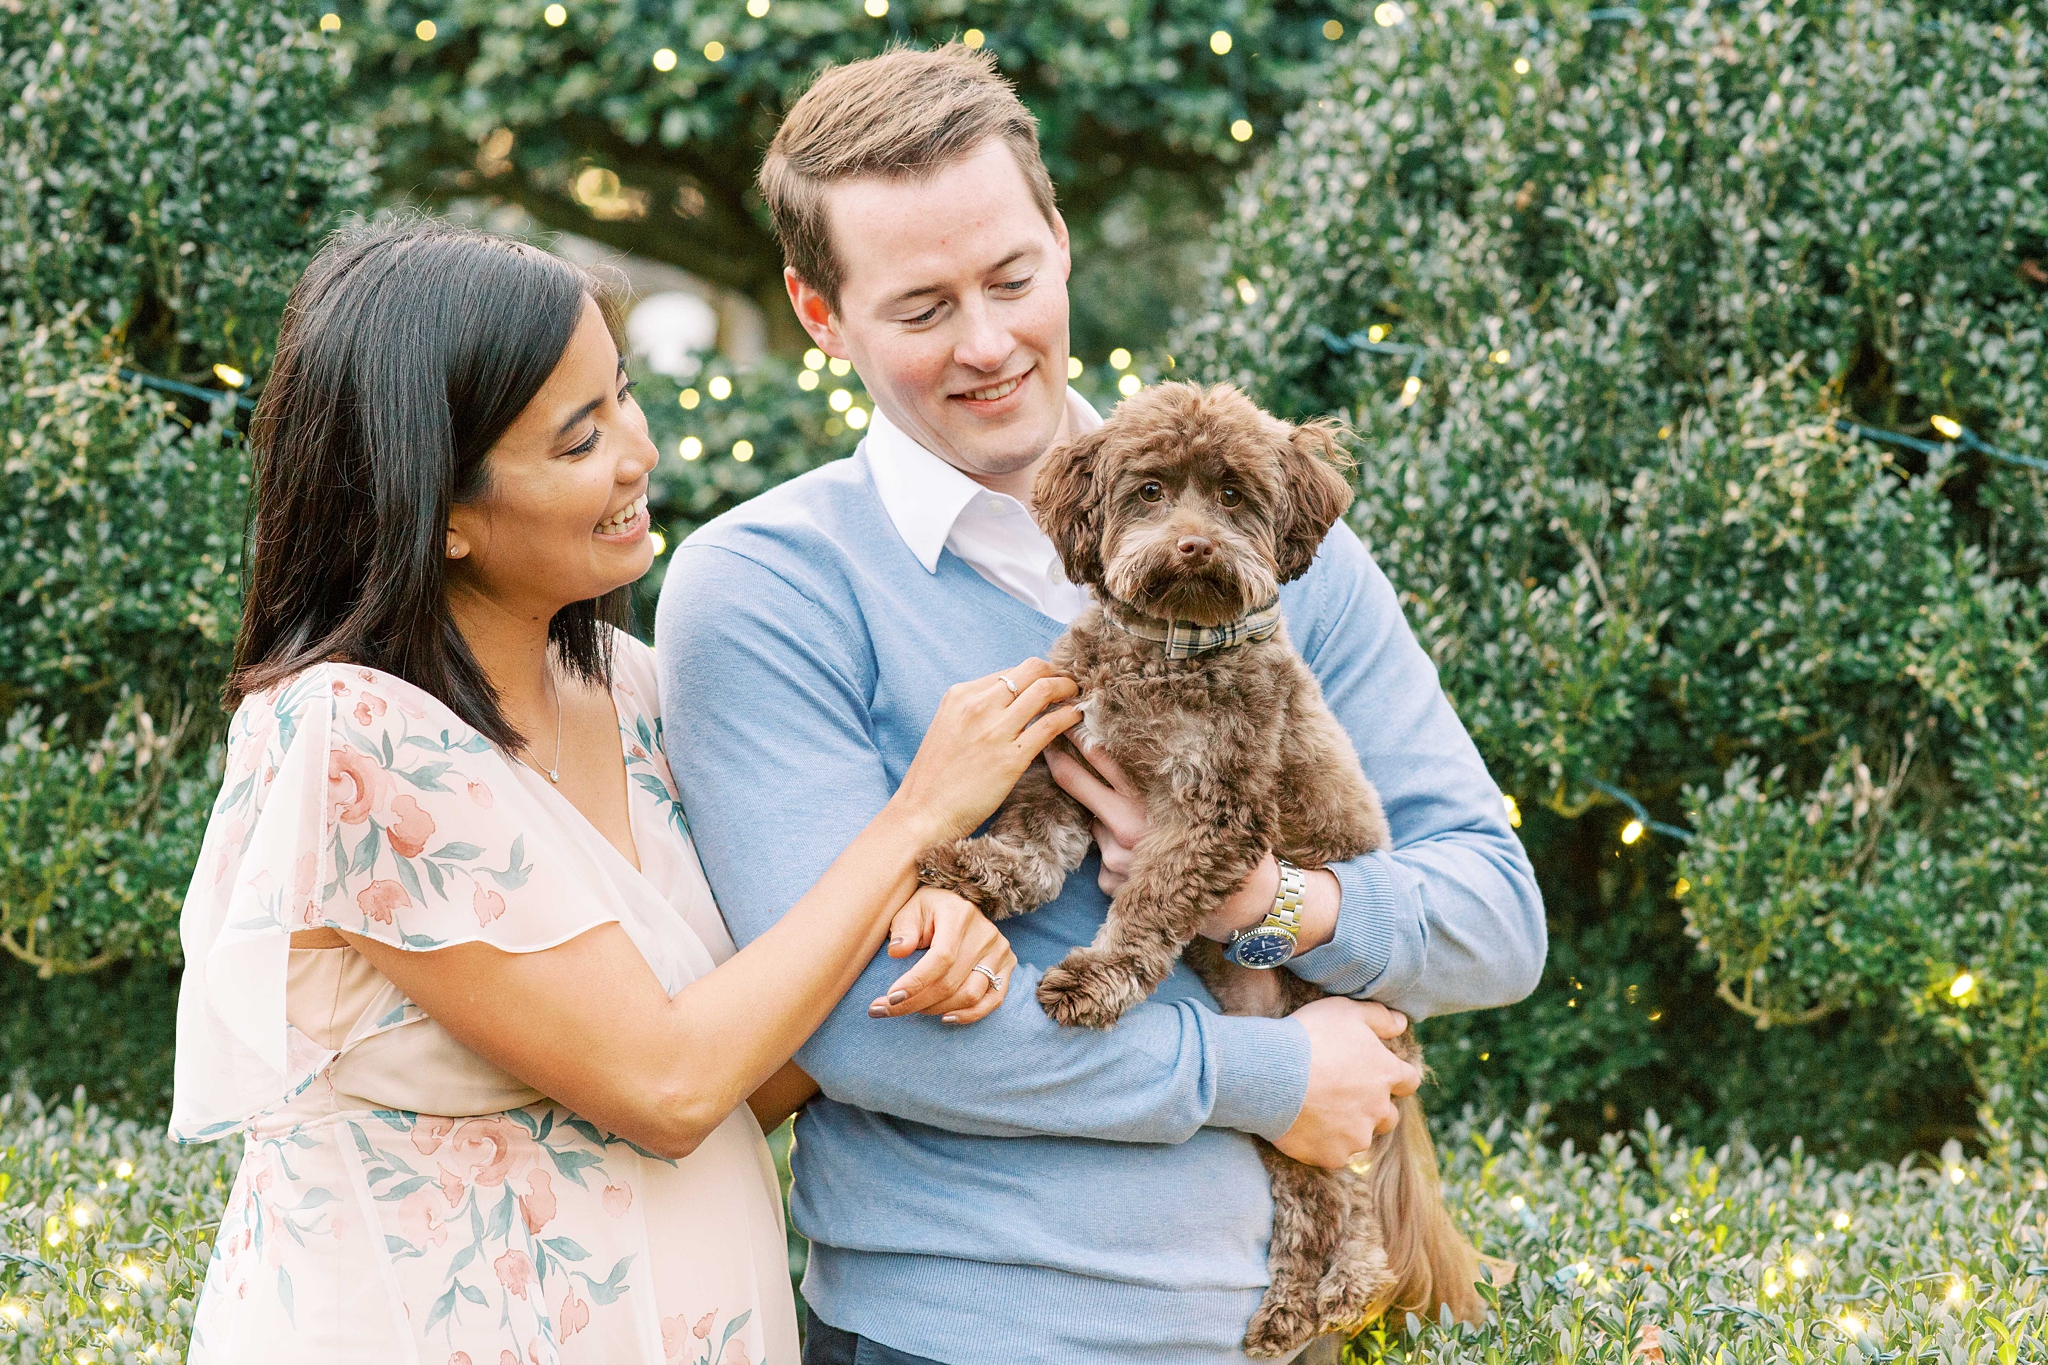 A fine art maternity session in the gardens of Airlie Center in Northern, VA featuring a stylish couple and their adorable dog.